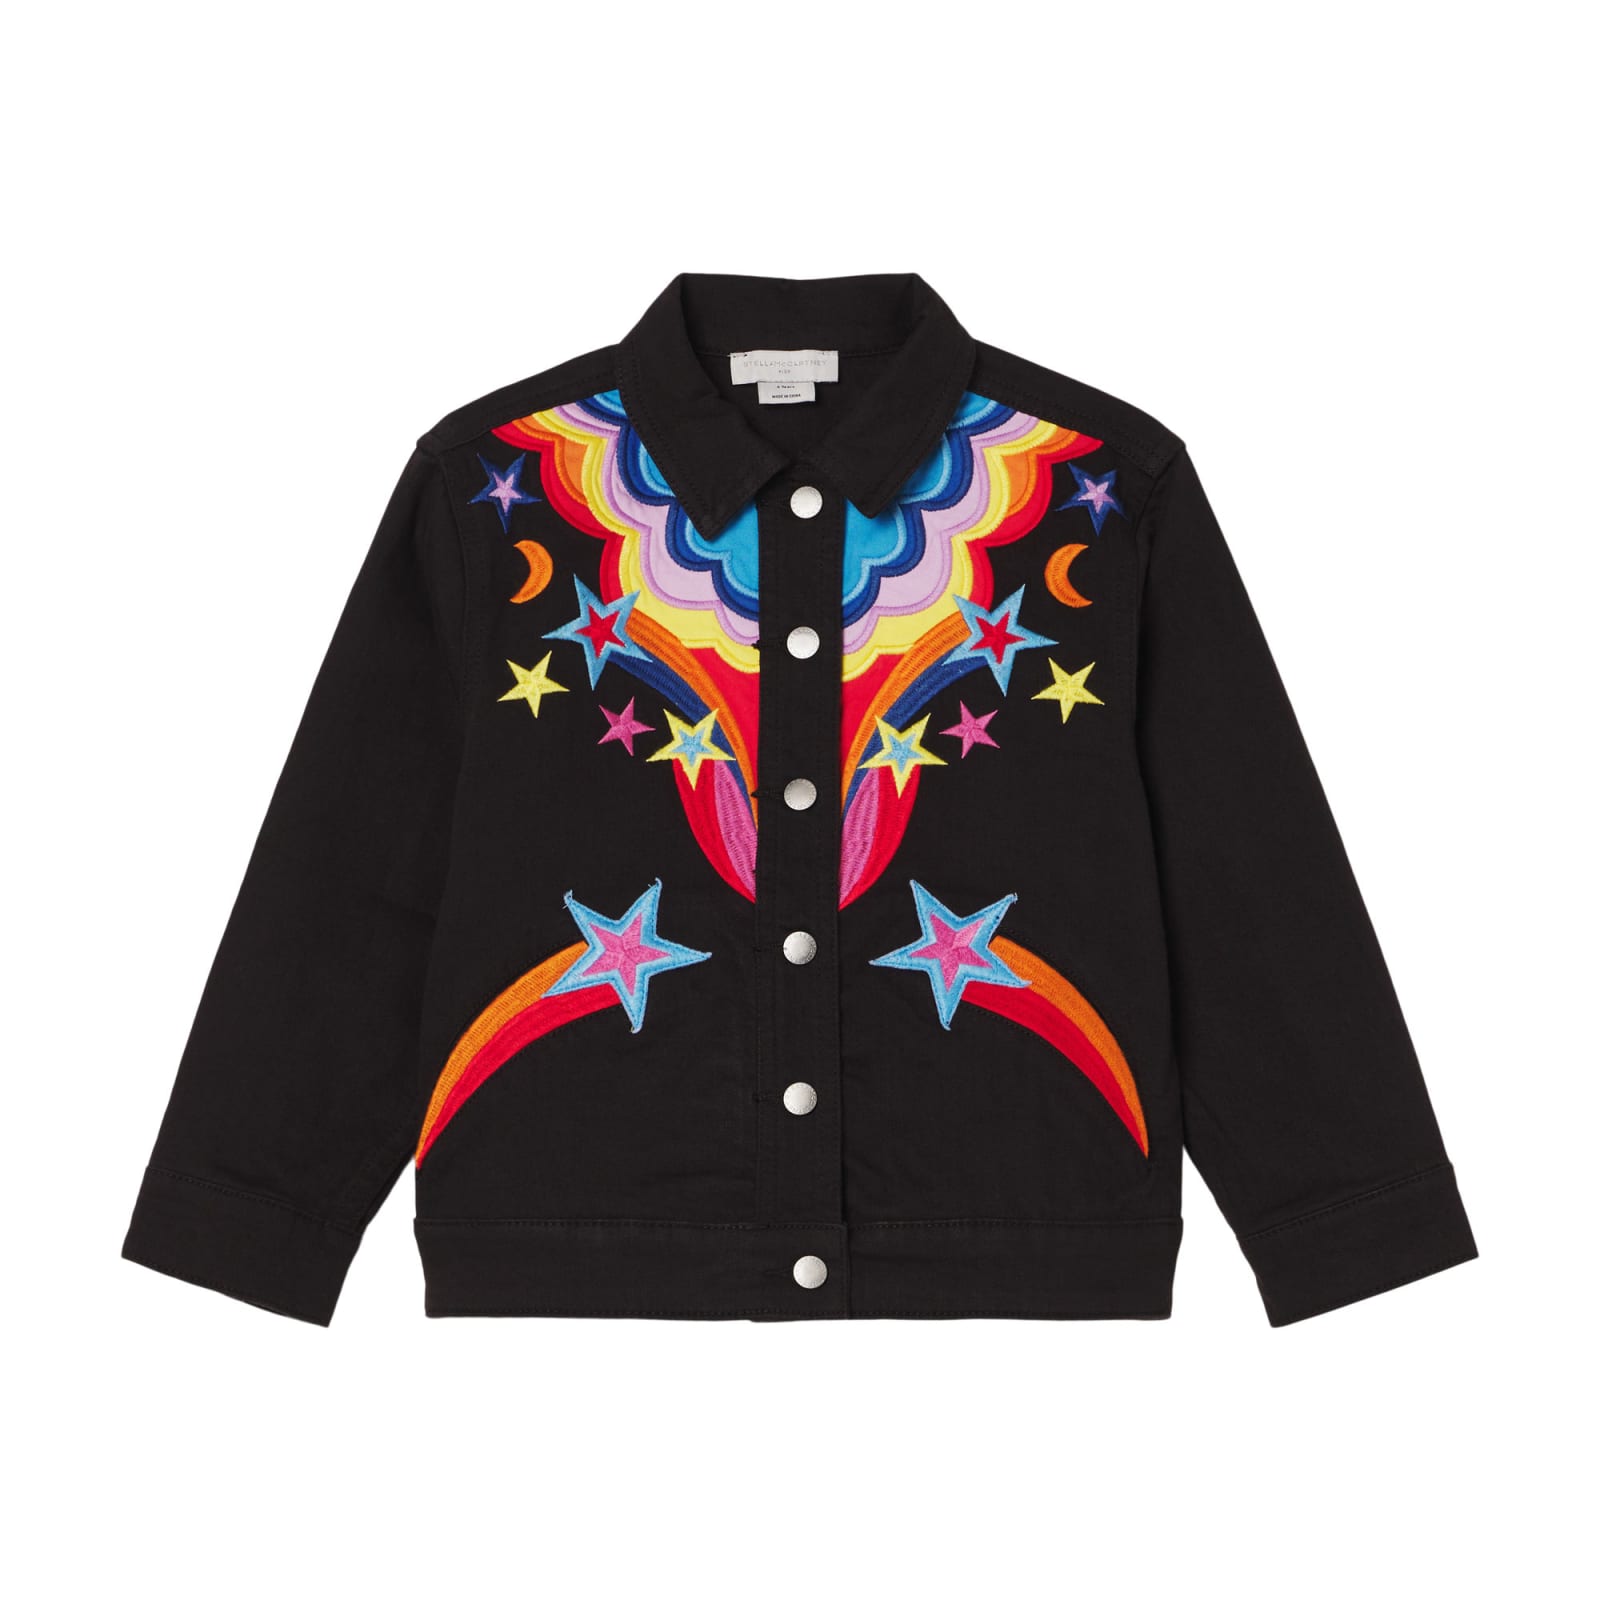 Stella McCartney Kids Kids Jacket In Black Denim With Embroidery Front And Back